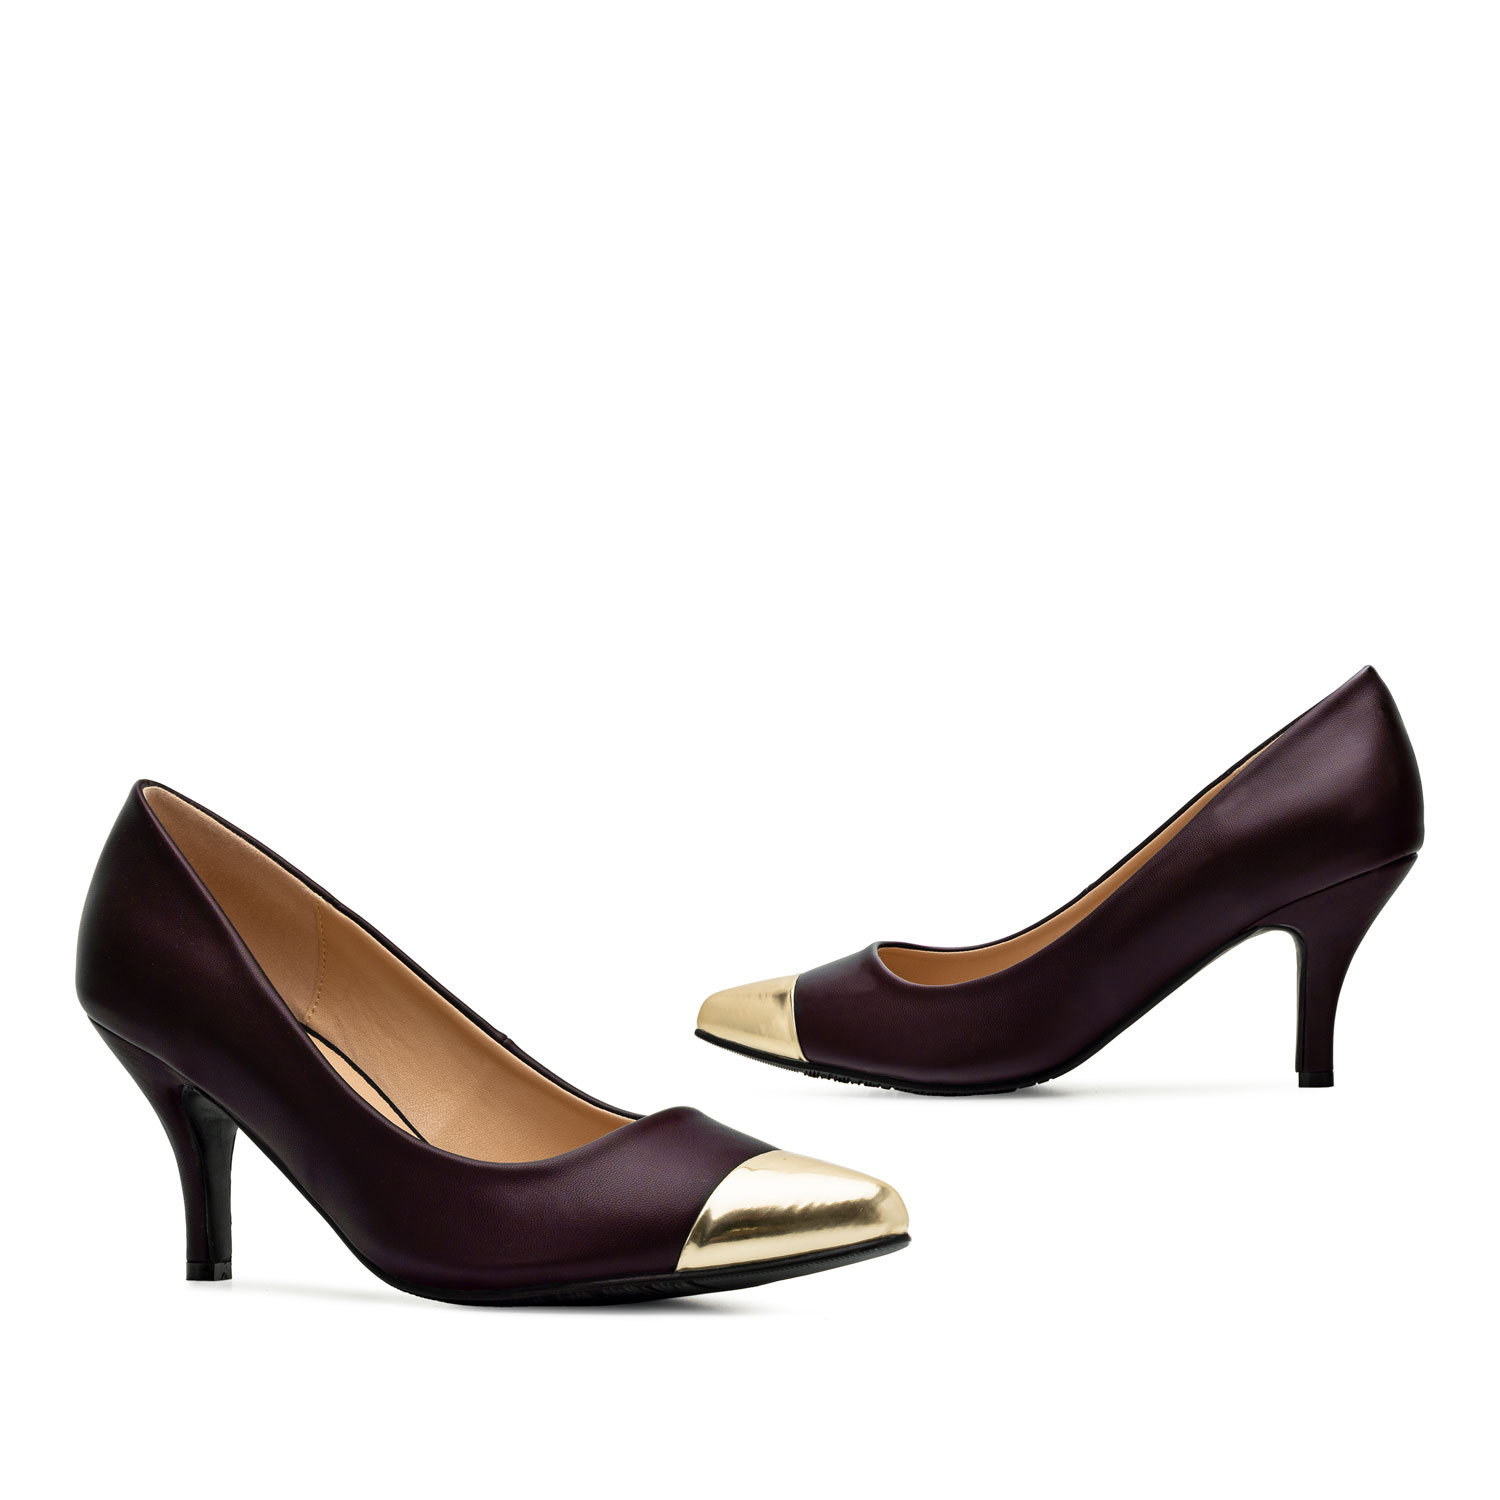 Stilettos in Burgundy Faux leather with Golden Toe Cap 